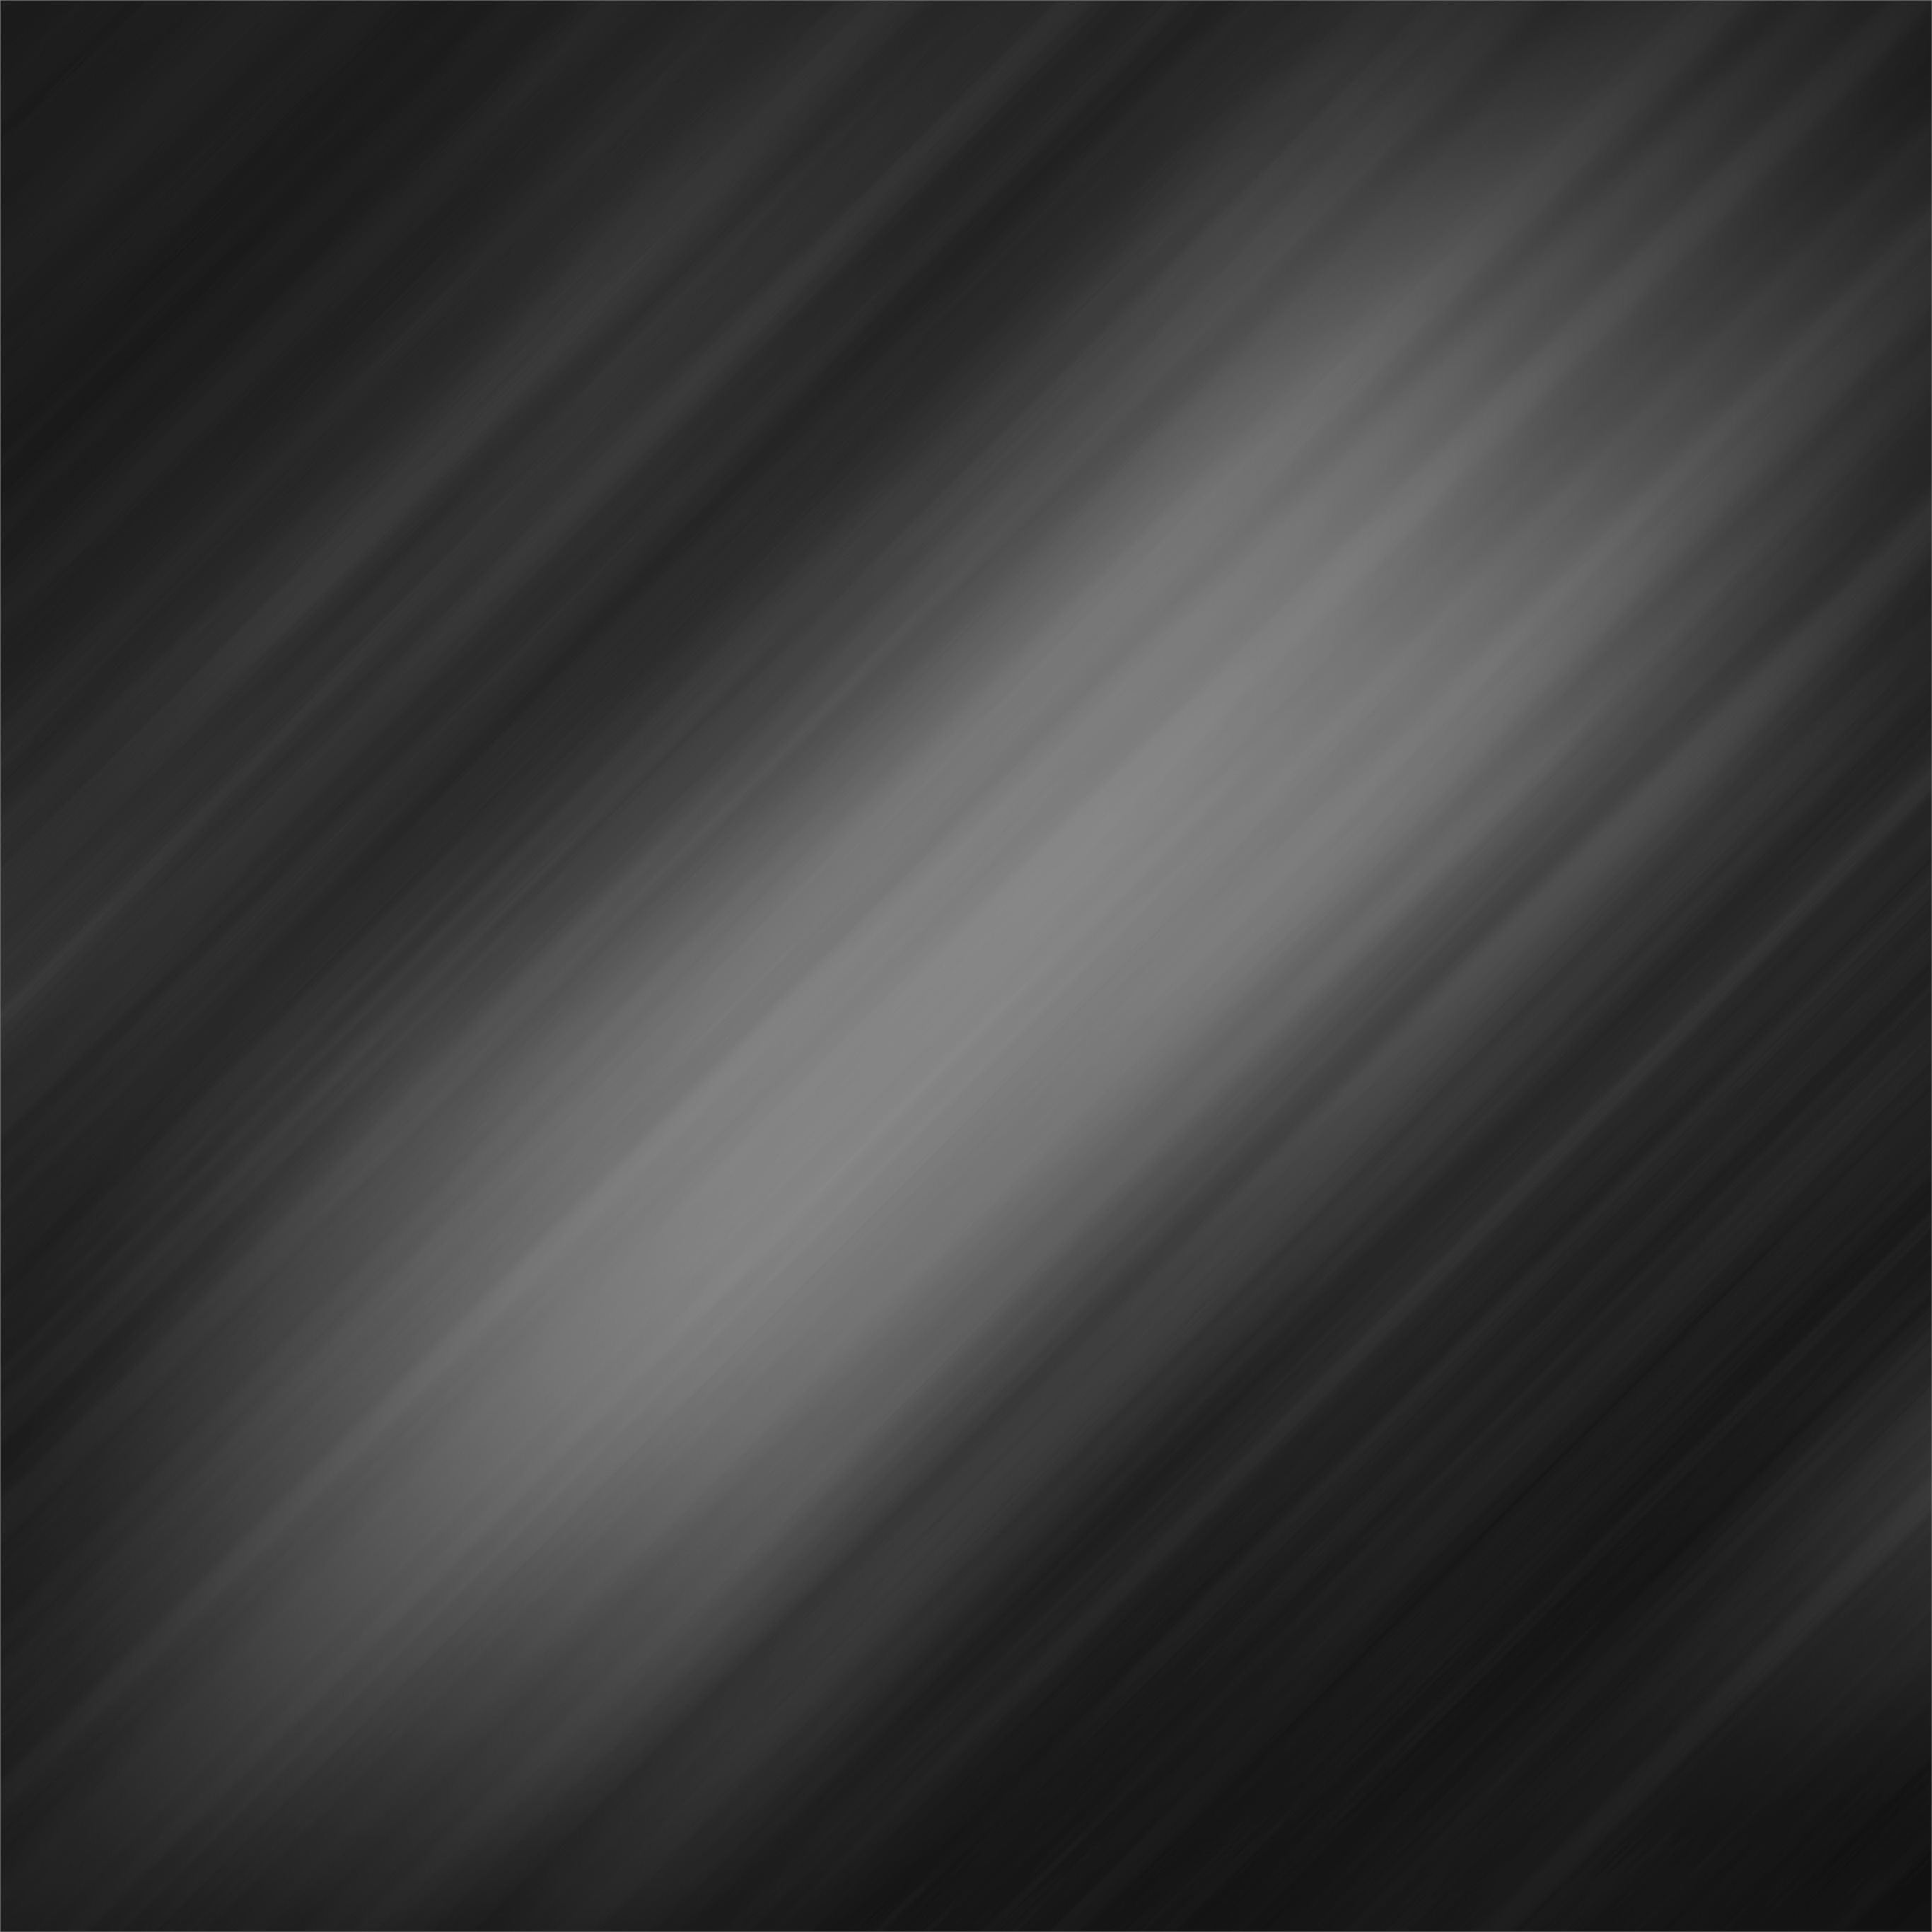 graphite abstract dark 5k iPad Pro Wallpapers Free Download